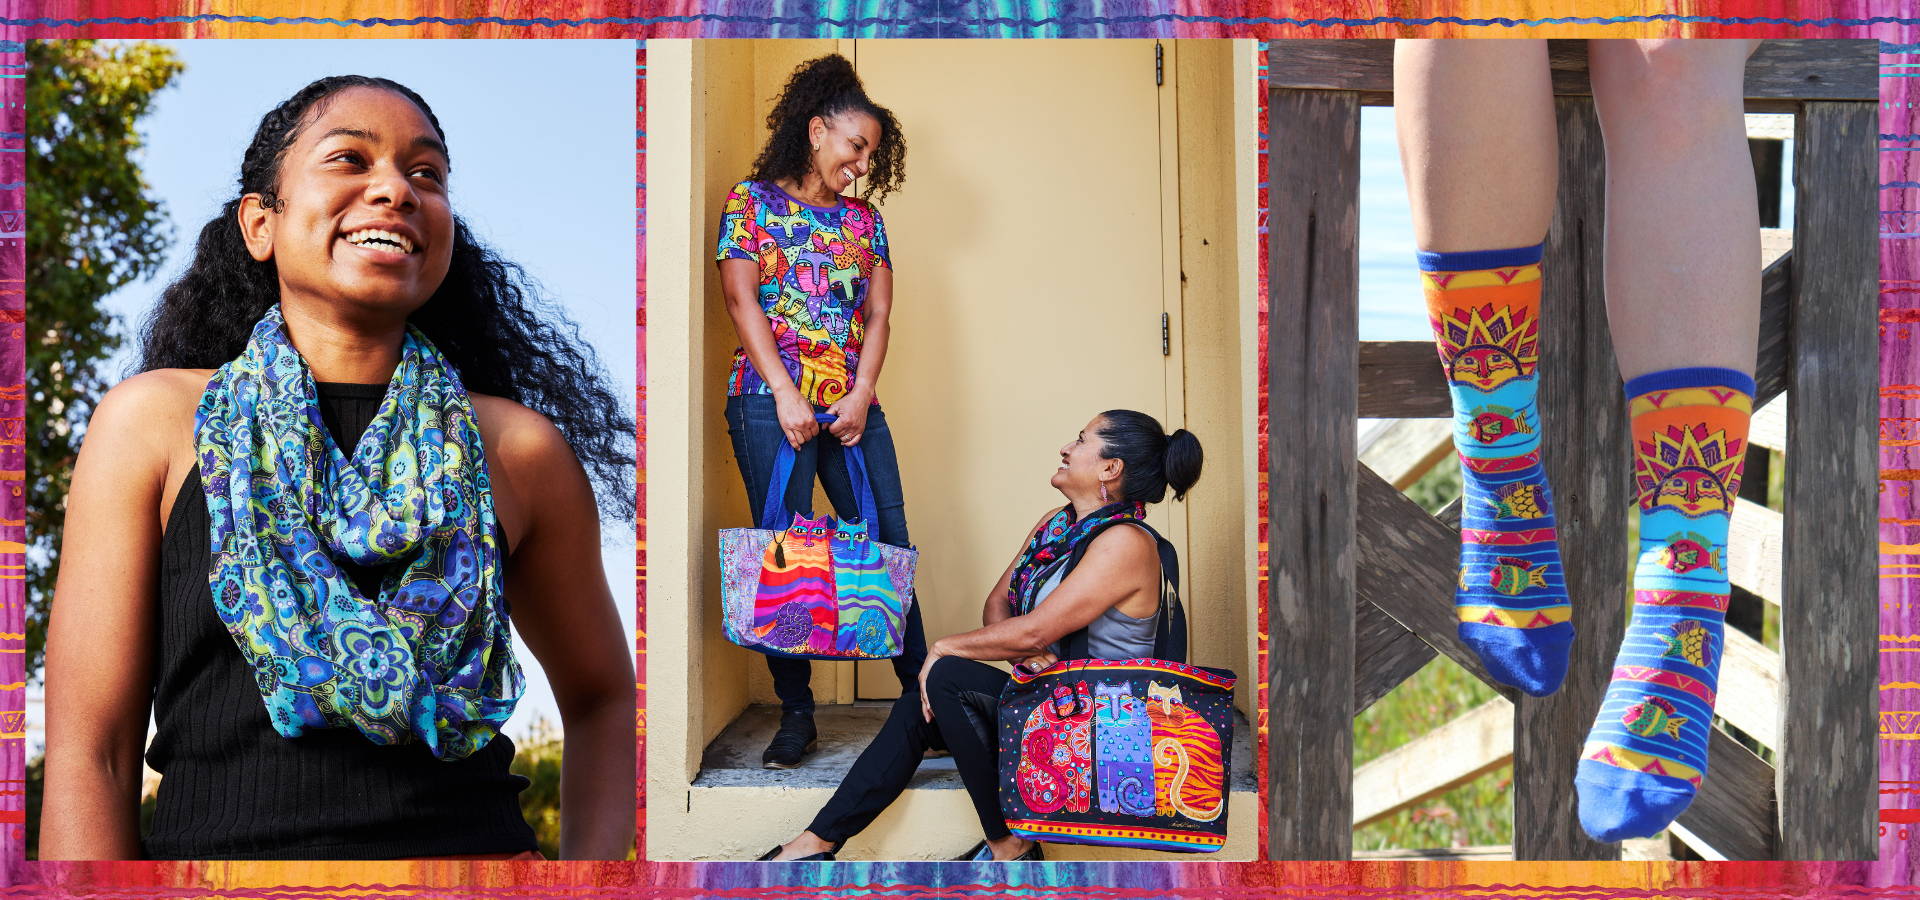 Various Laurel Burch designs on apparel and accessories